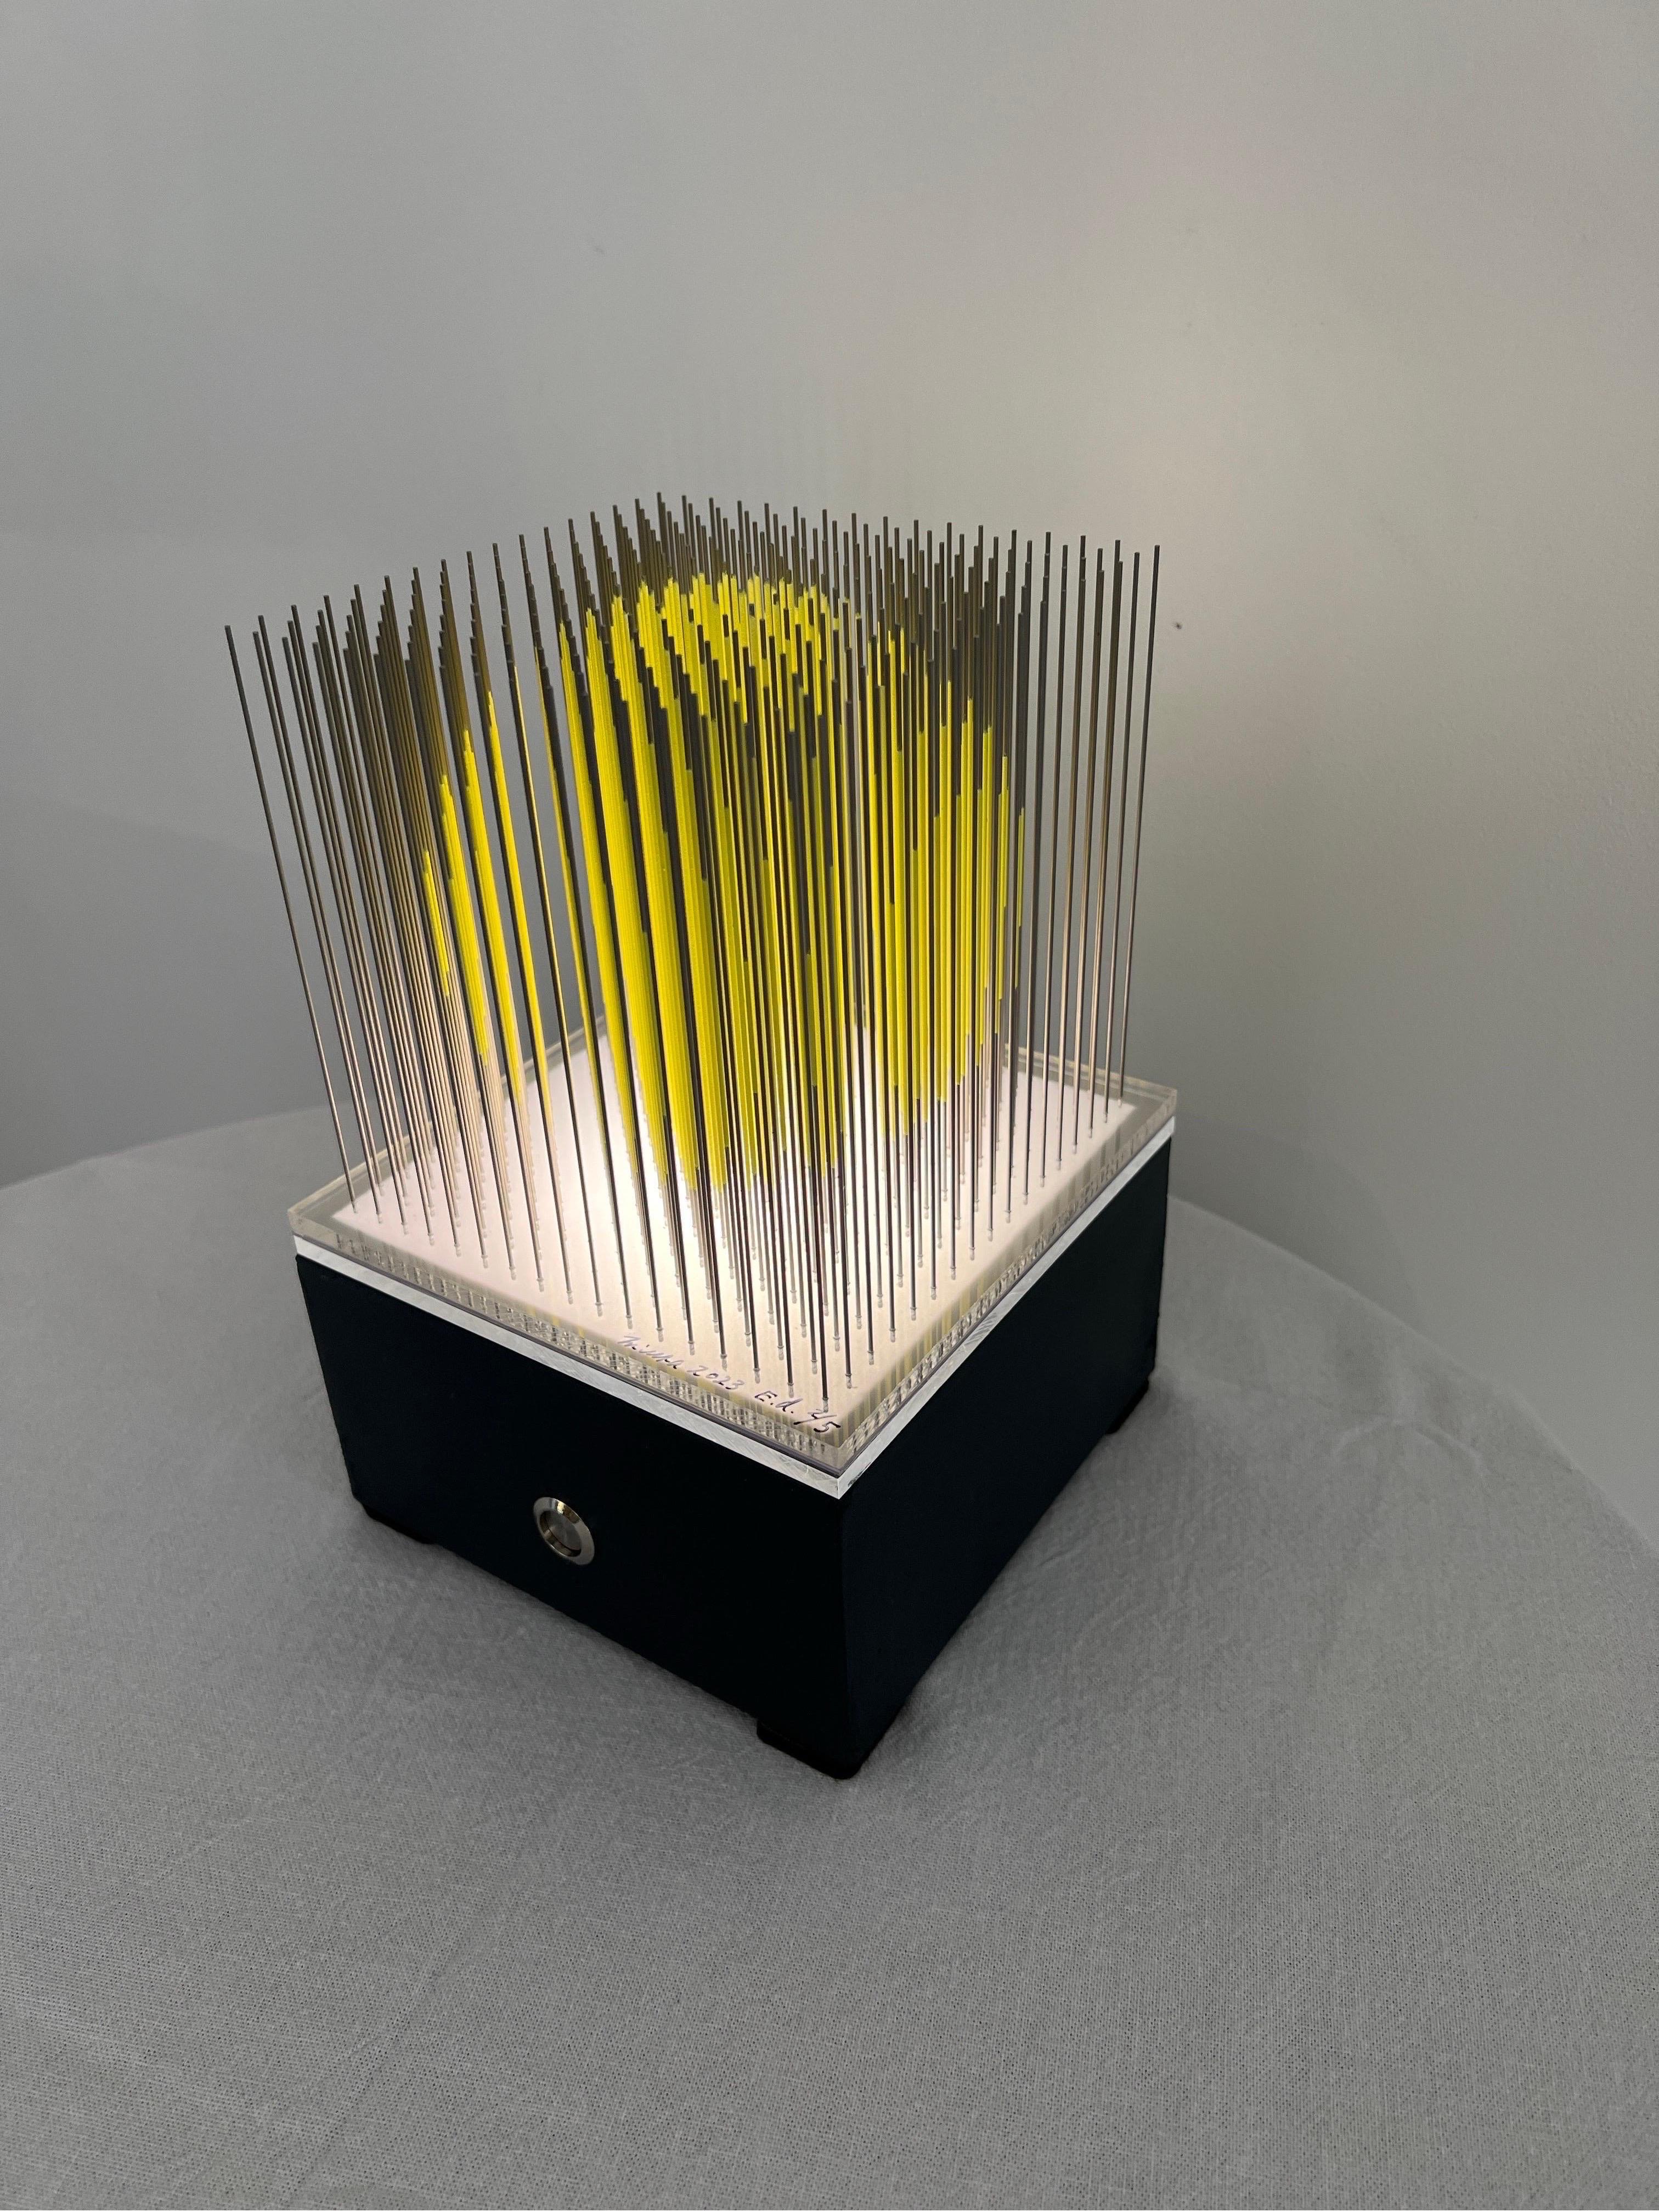 Acrylic on stainless steel needles, entirely hand done, on led pedestal (not included).
Yoshiyuki Miura is a kinetic art (op art) Master, highly collectable. This piece is light by a LED pedestal, which is optional. The overall dimensions are 22,5